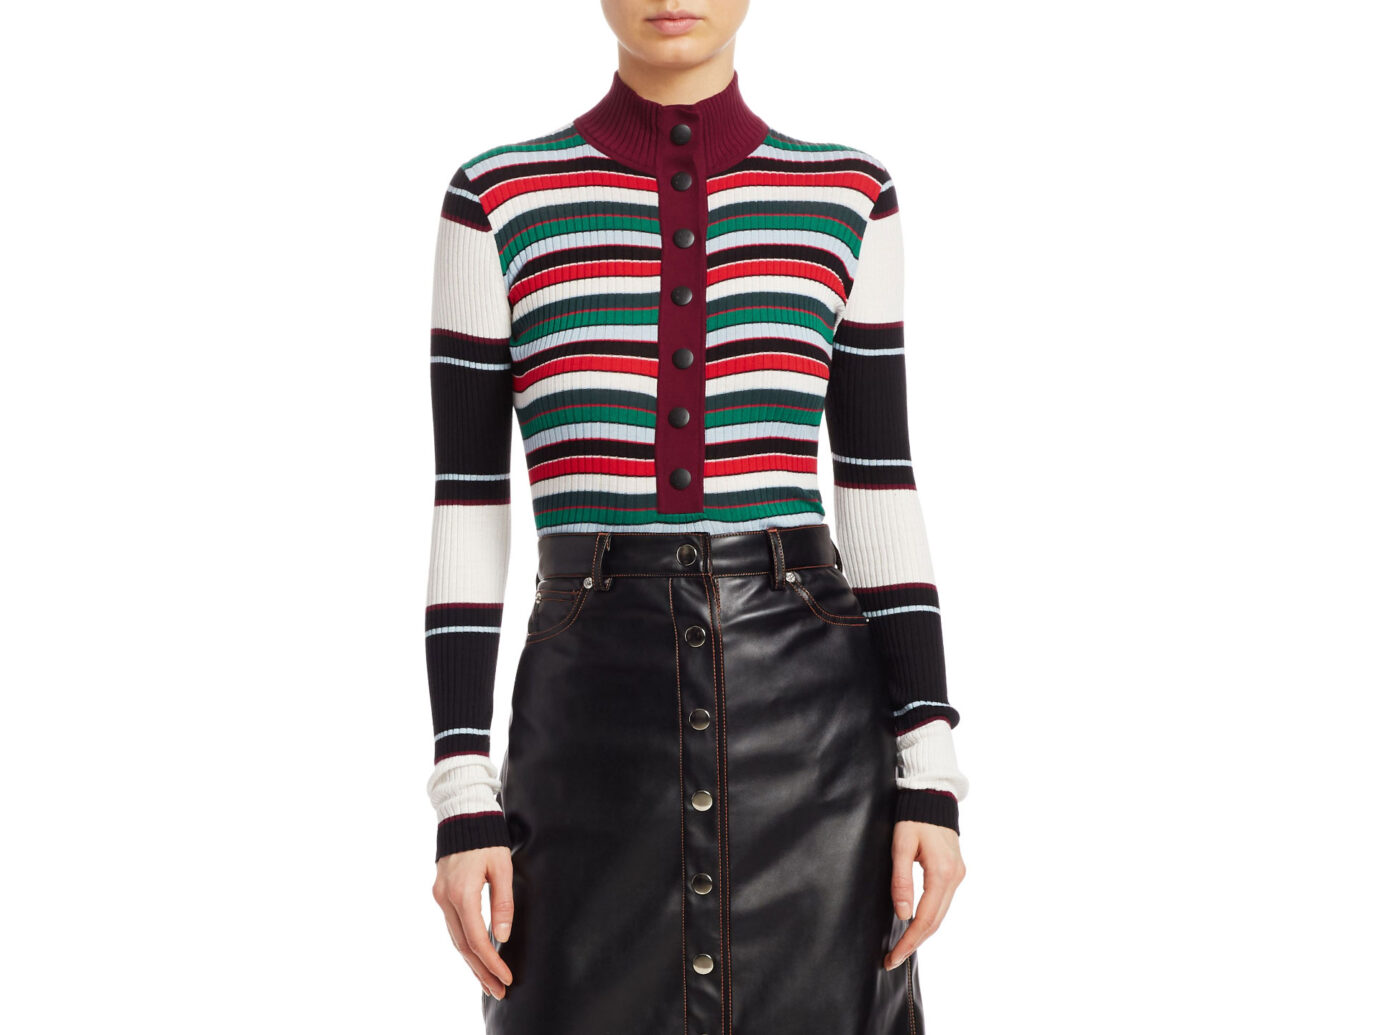 Proenza Schouler PSWL Ribbed Rugby Striped Turtleneck Sweater